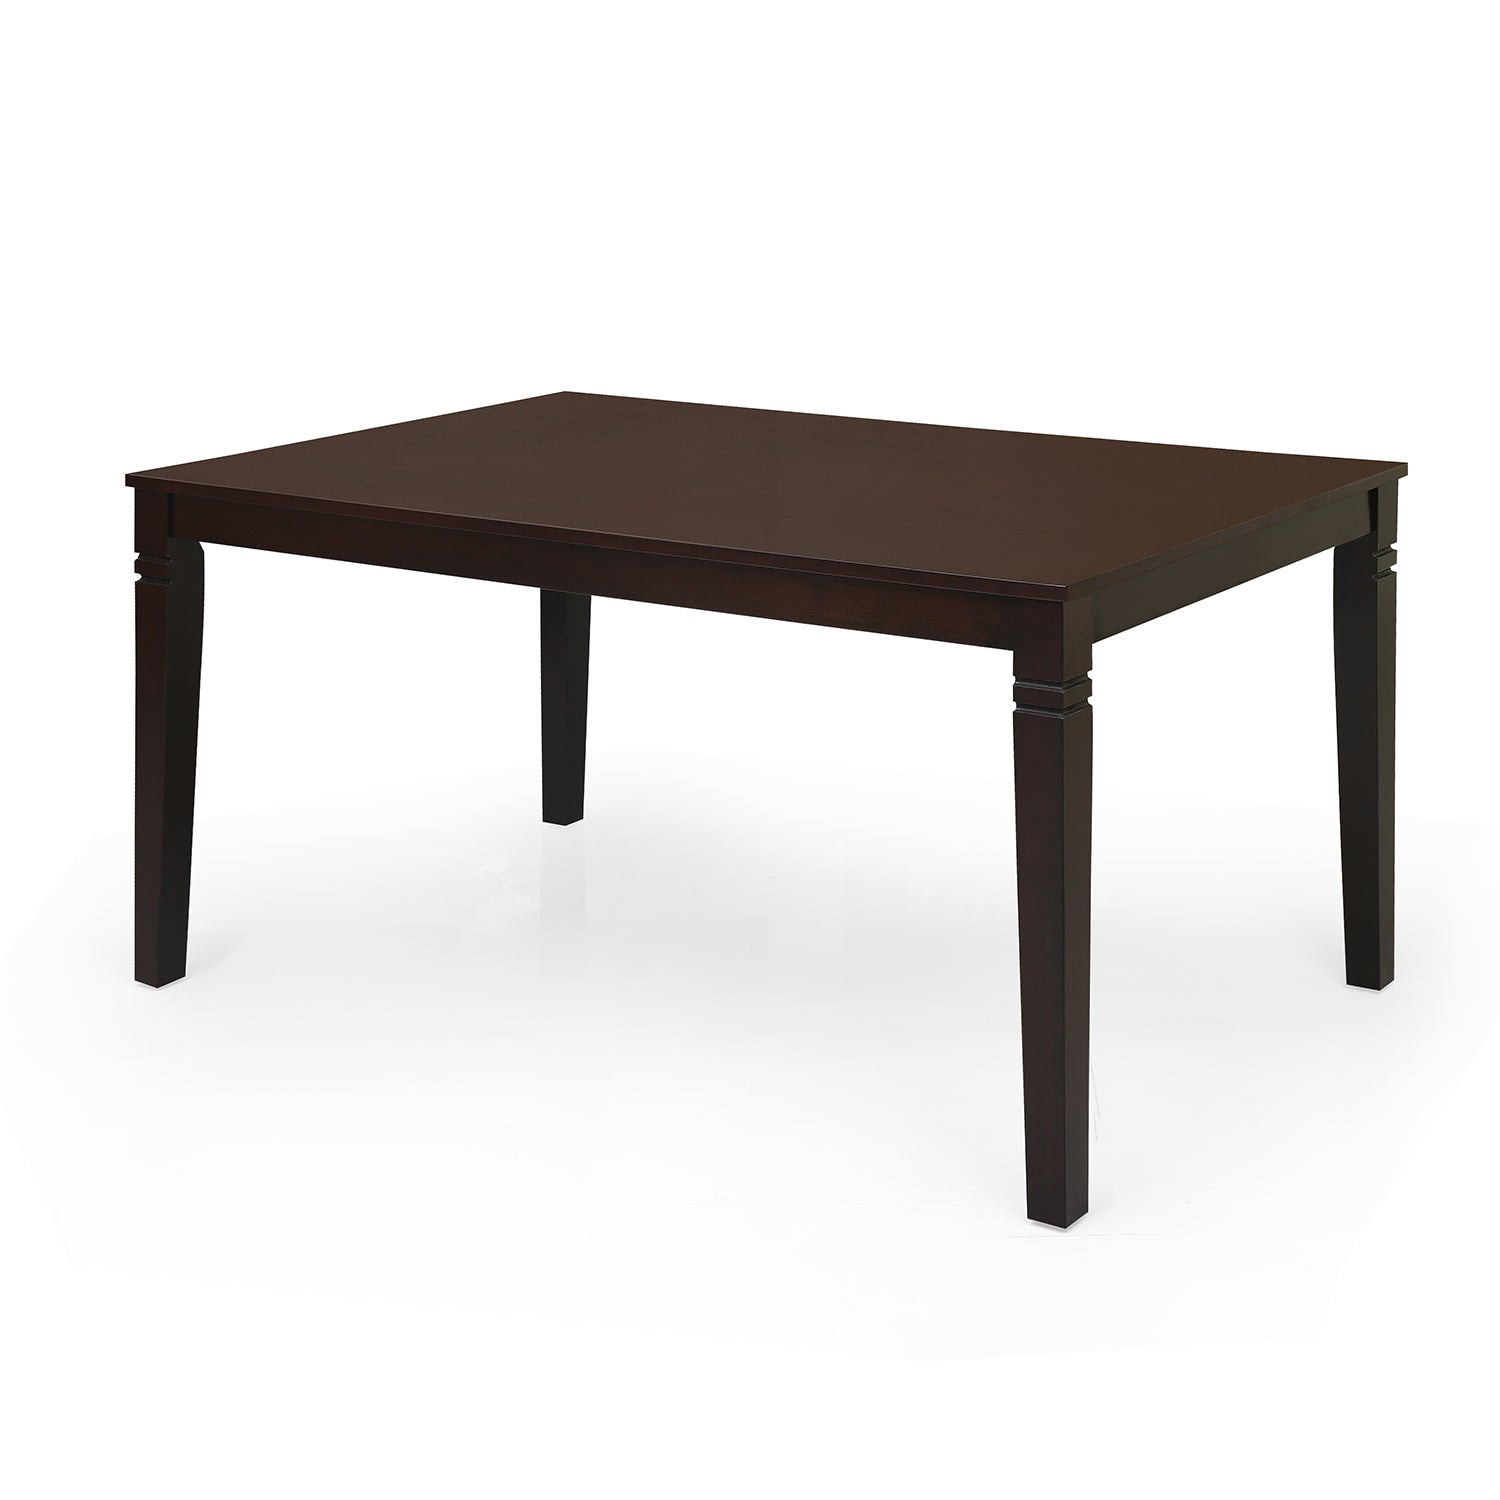 Fern 6 Seater Dining Table (Erin Brown)